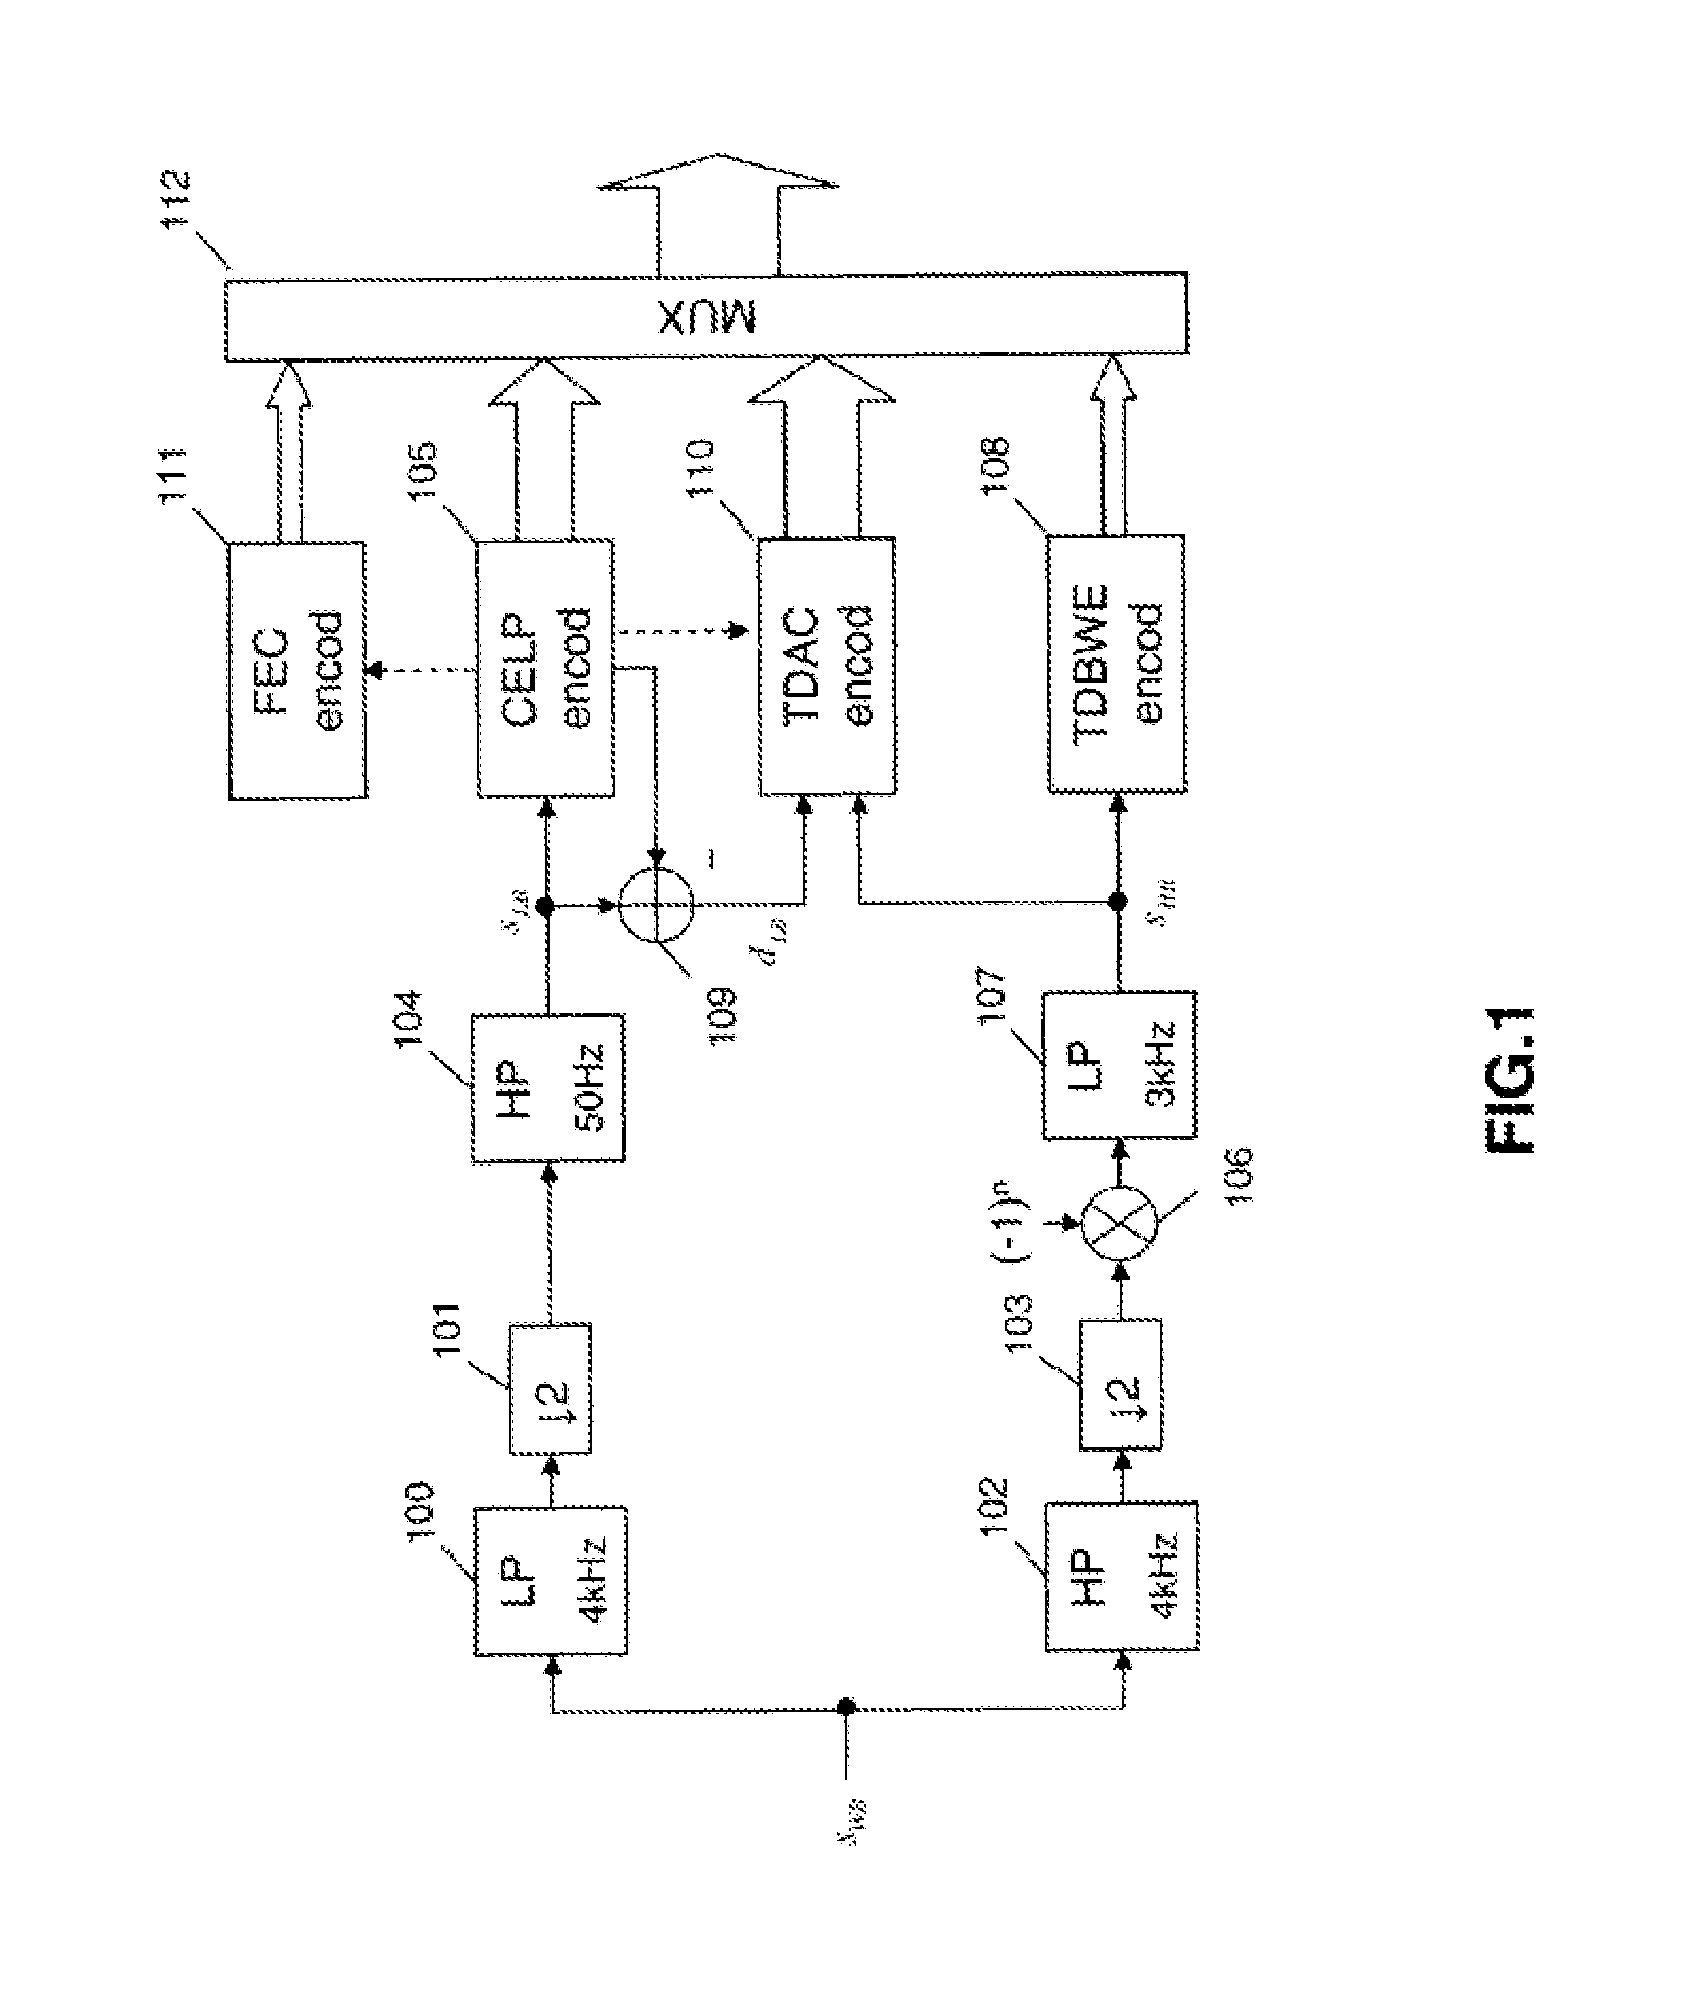 Allocation of bits in an enhancement coding/decoding for improving a hierarchical coding/decoding of digital audio signals